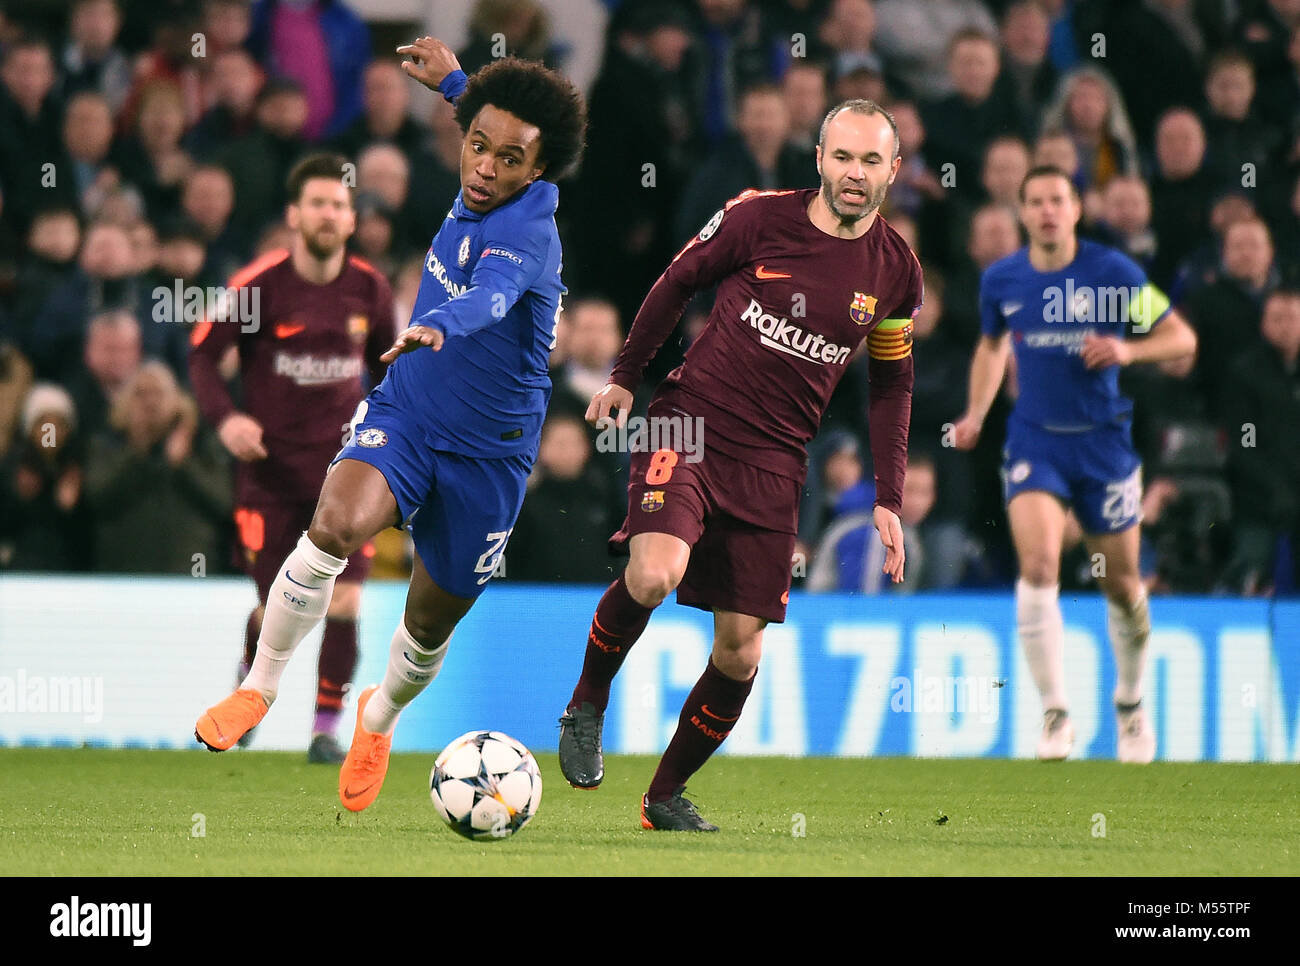 London, UK. 20th Feb, 2018. Willian of Chelsea and Andres Iniesta of Barcelona challenge for the ball during the UEFA Champions League Round of 16 first leg match between Chelsea and Barcelona at Stamford Bridge on February 20th 2018 in London, England. Credit: PHC Images/Alamy Live News Stock Photo